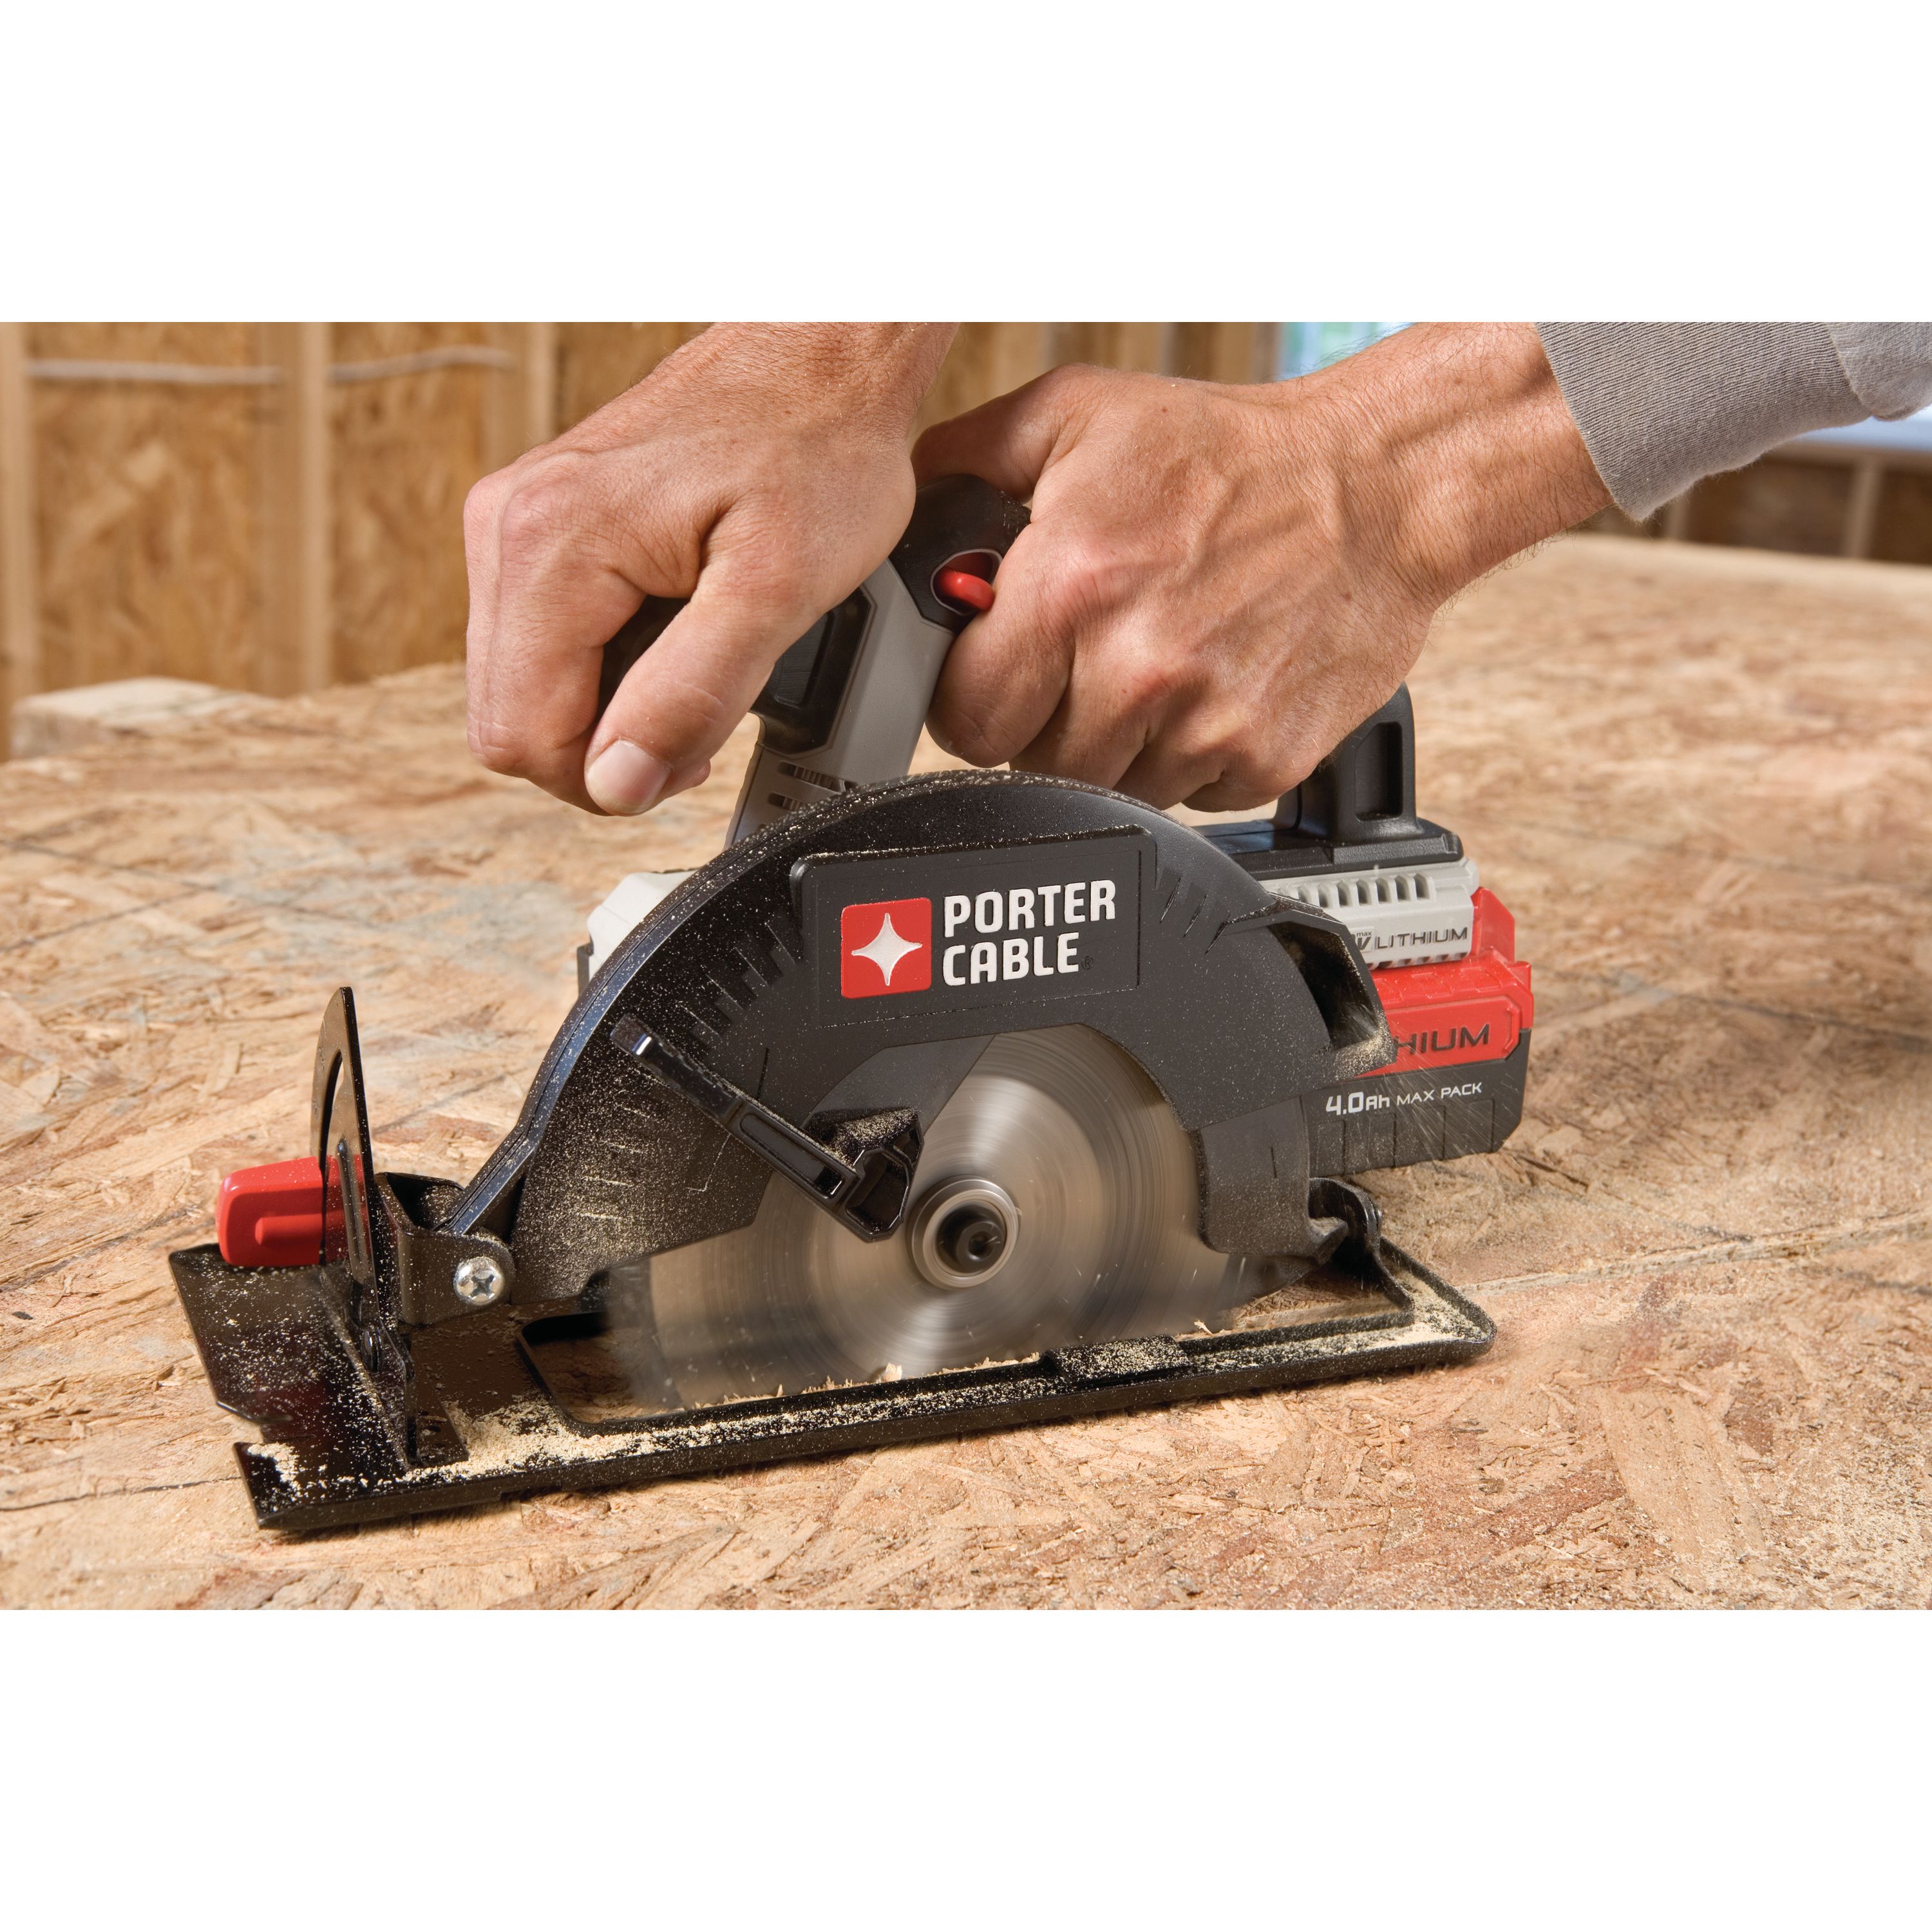 PORTER CABLE 20V MAX Lithium-Ion 6.5-Inch Cordless Circular Saw (Bare Tool  Battery Sold Separately), PCC660B